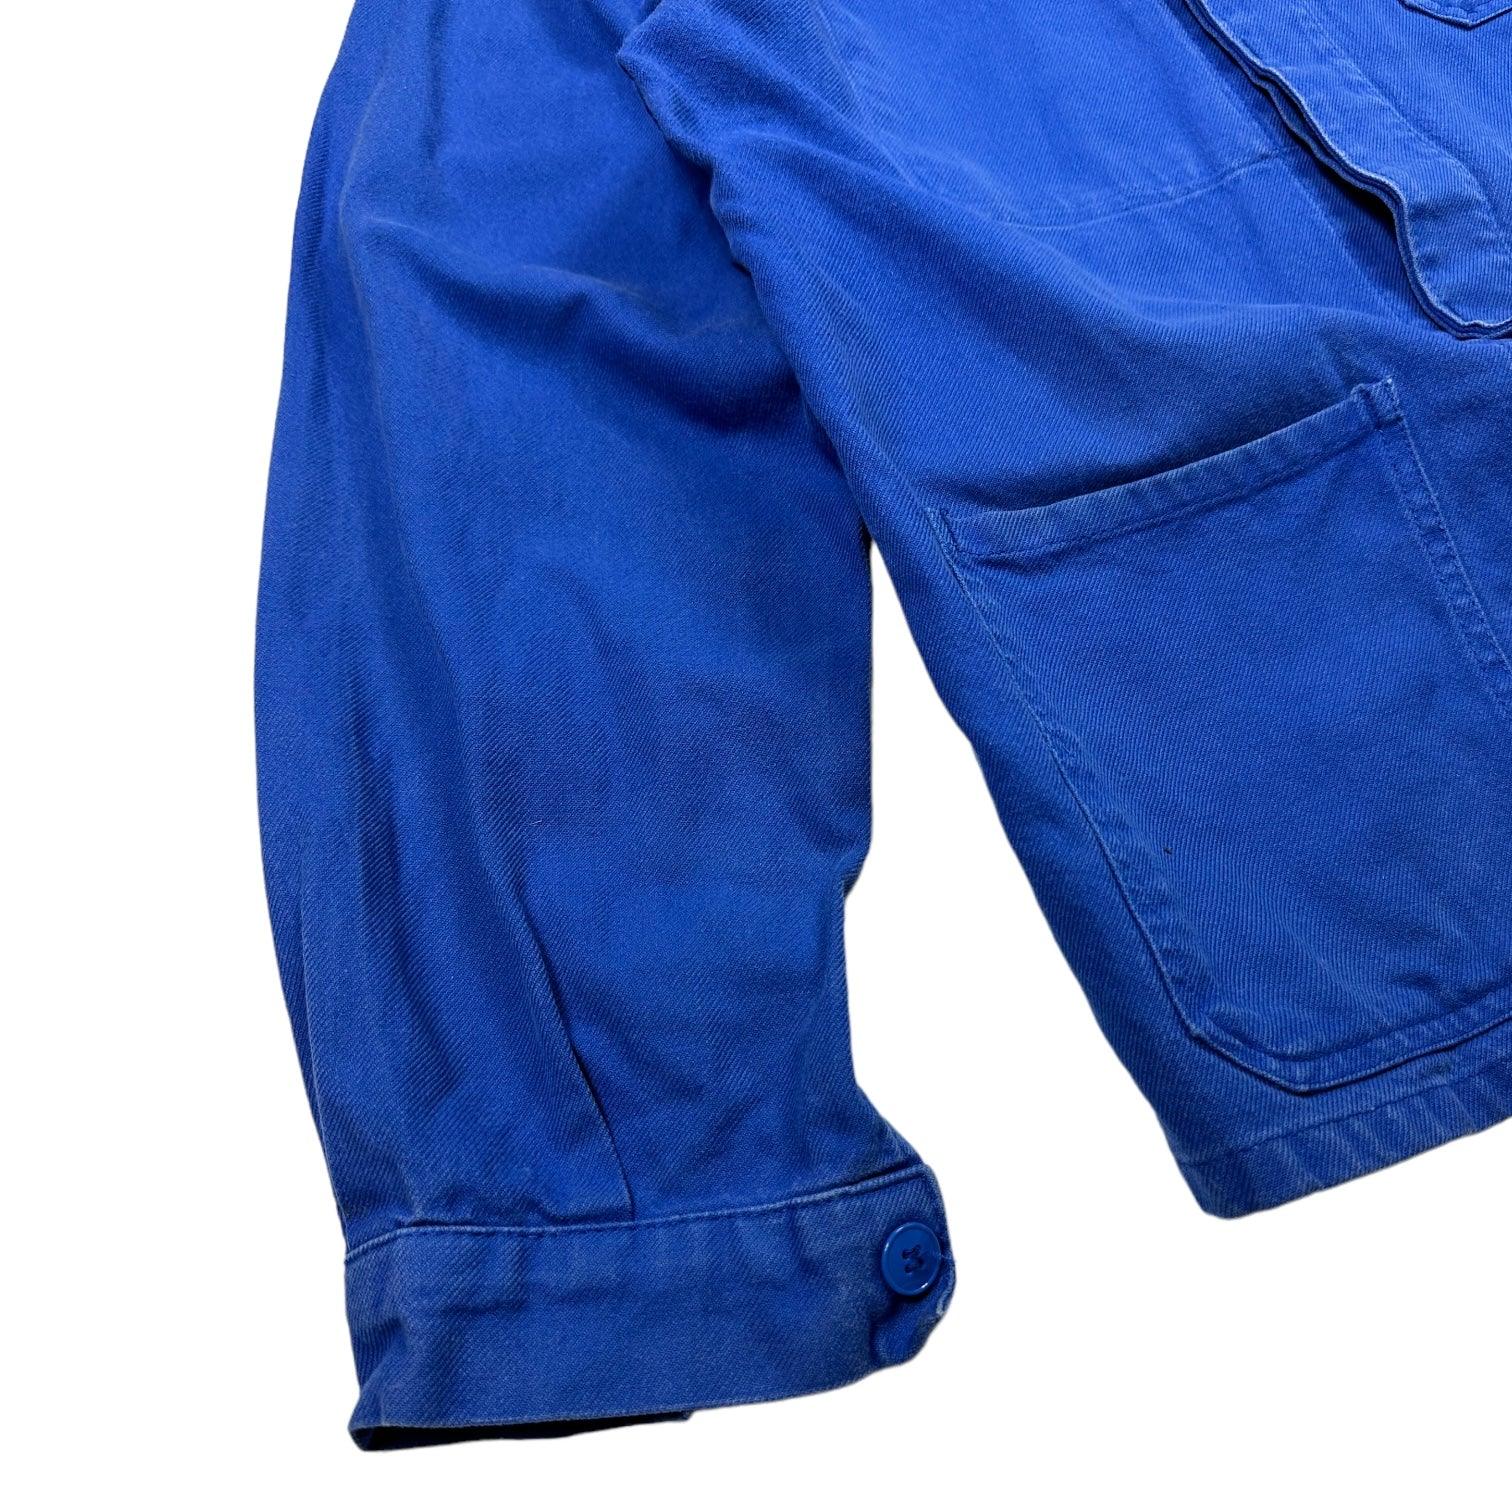 Vintage French Workwear Blue Chore Jacket - Known Source